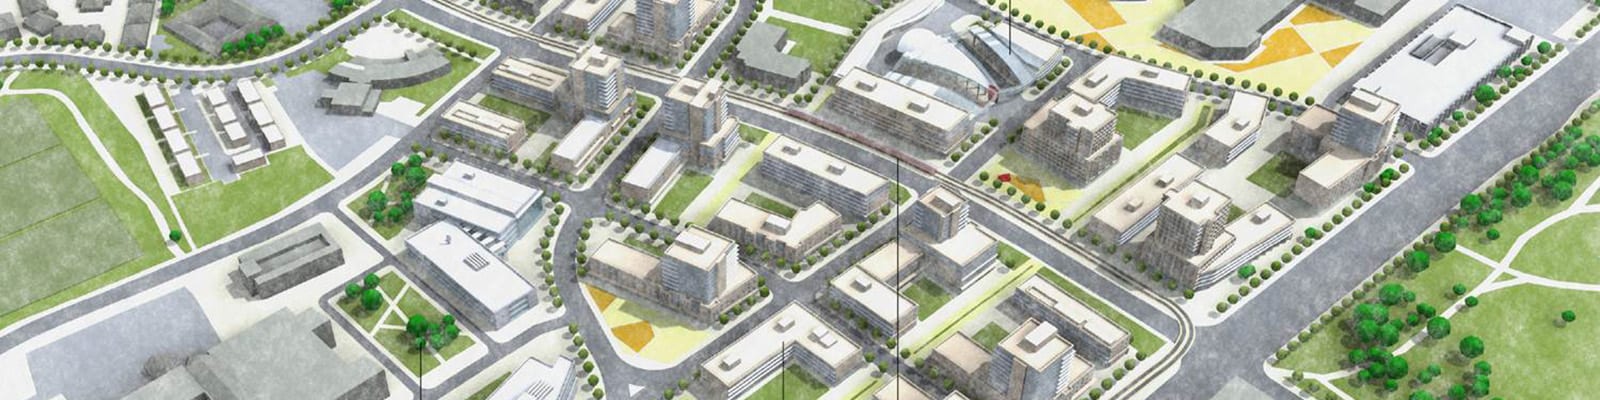 Rendering of the Belgravia and Mill Woods Station Area Plan.